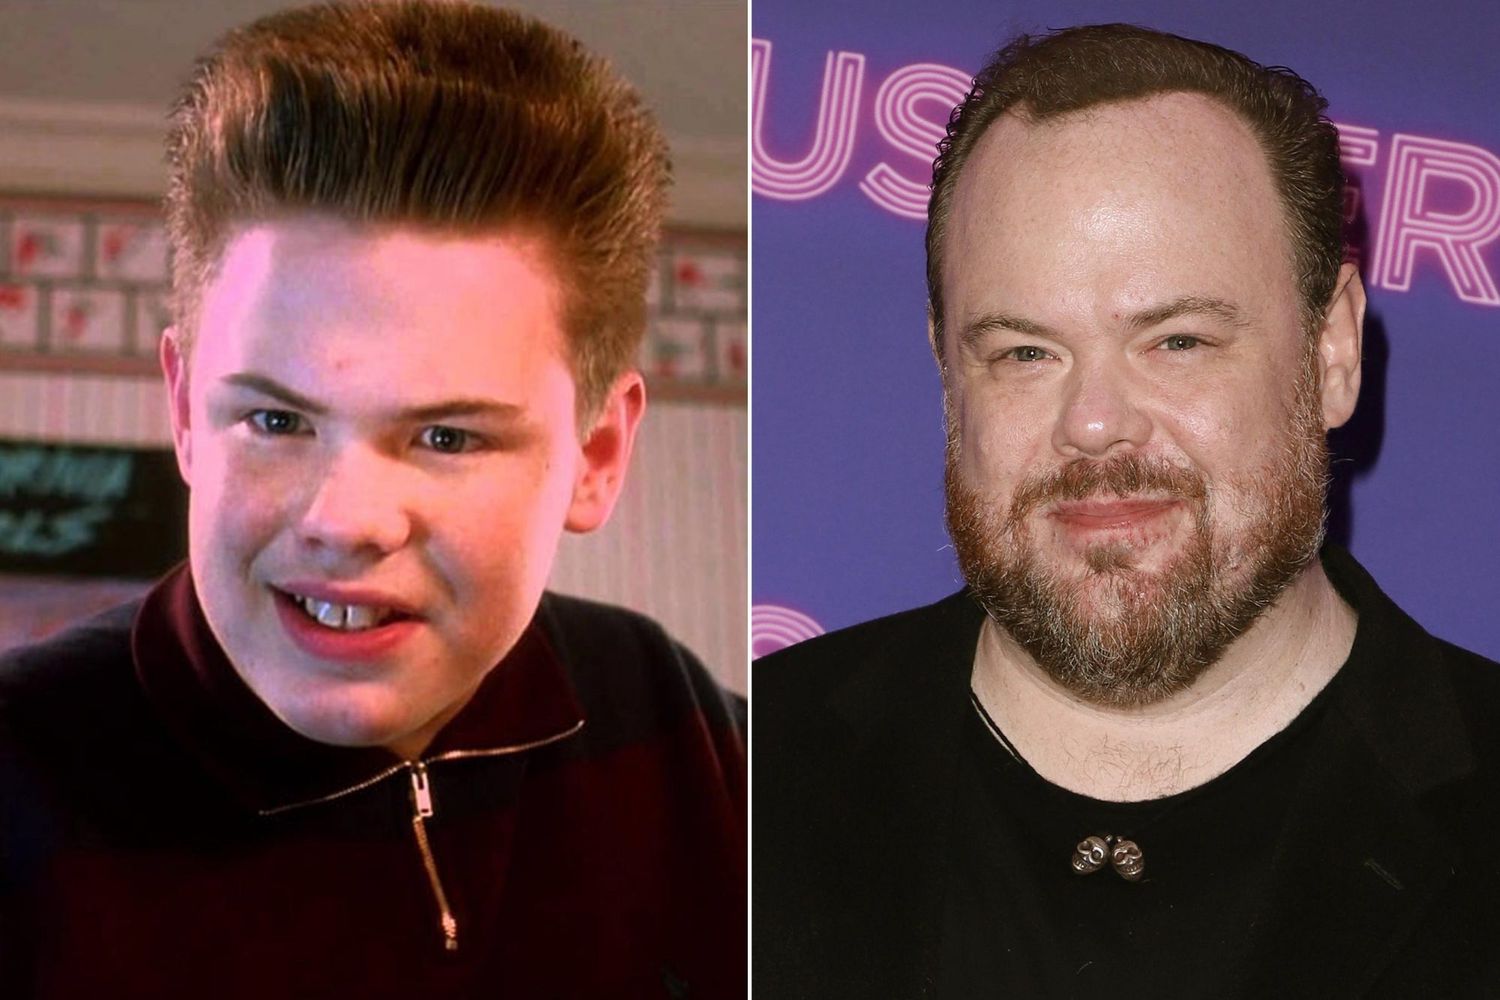 Gallery: Home ALone Where Are They Now